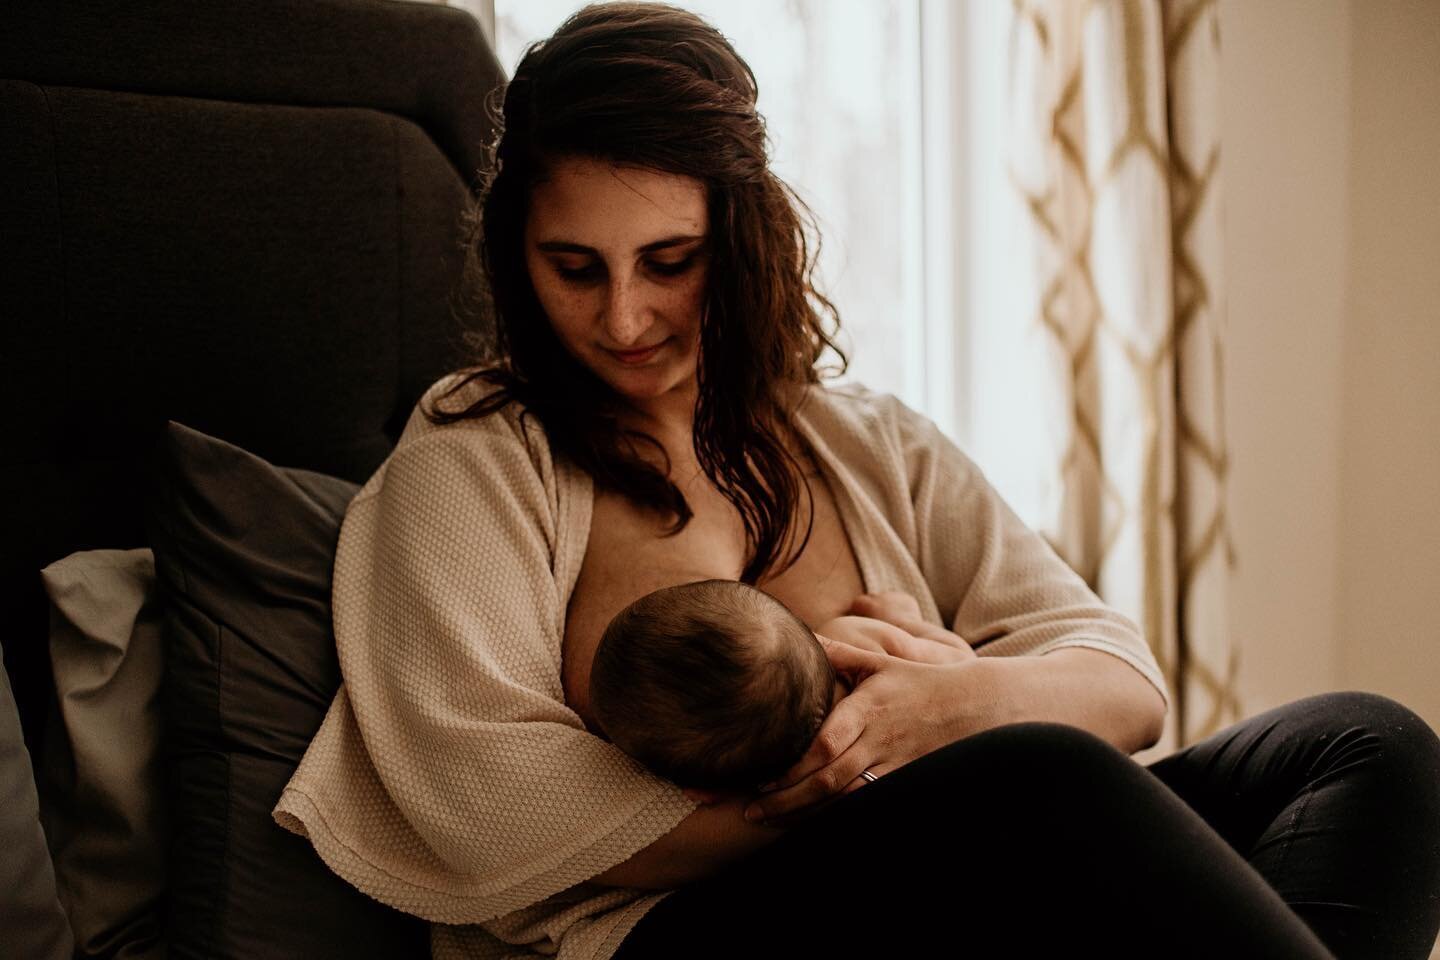 Cozy in home newborn sessions... they&rsquo;re especially special to me when they&rsquo;re with families that I got to capture the birth of. &hearts;️ 

The postpartum period has such a special place in my heart. It&rsquo;s where I personally lost an